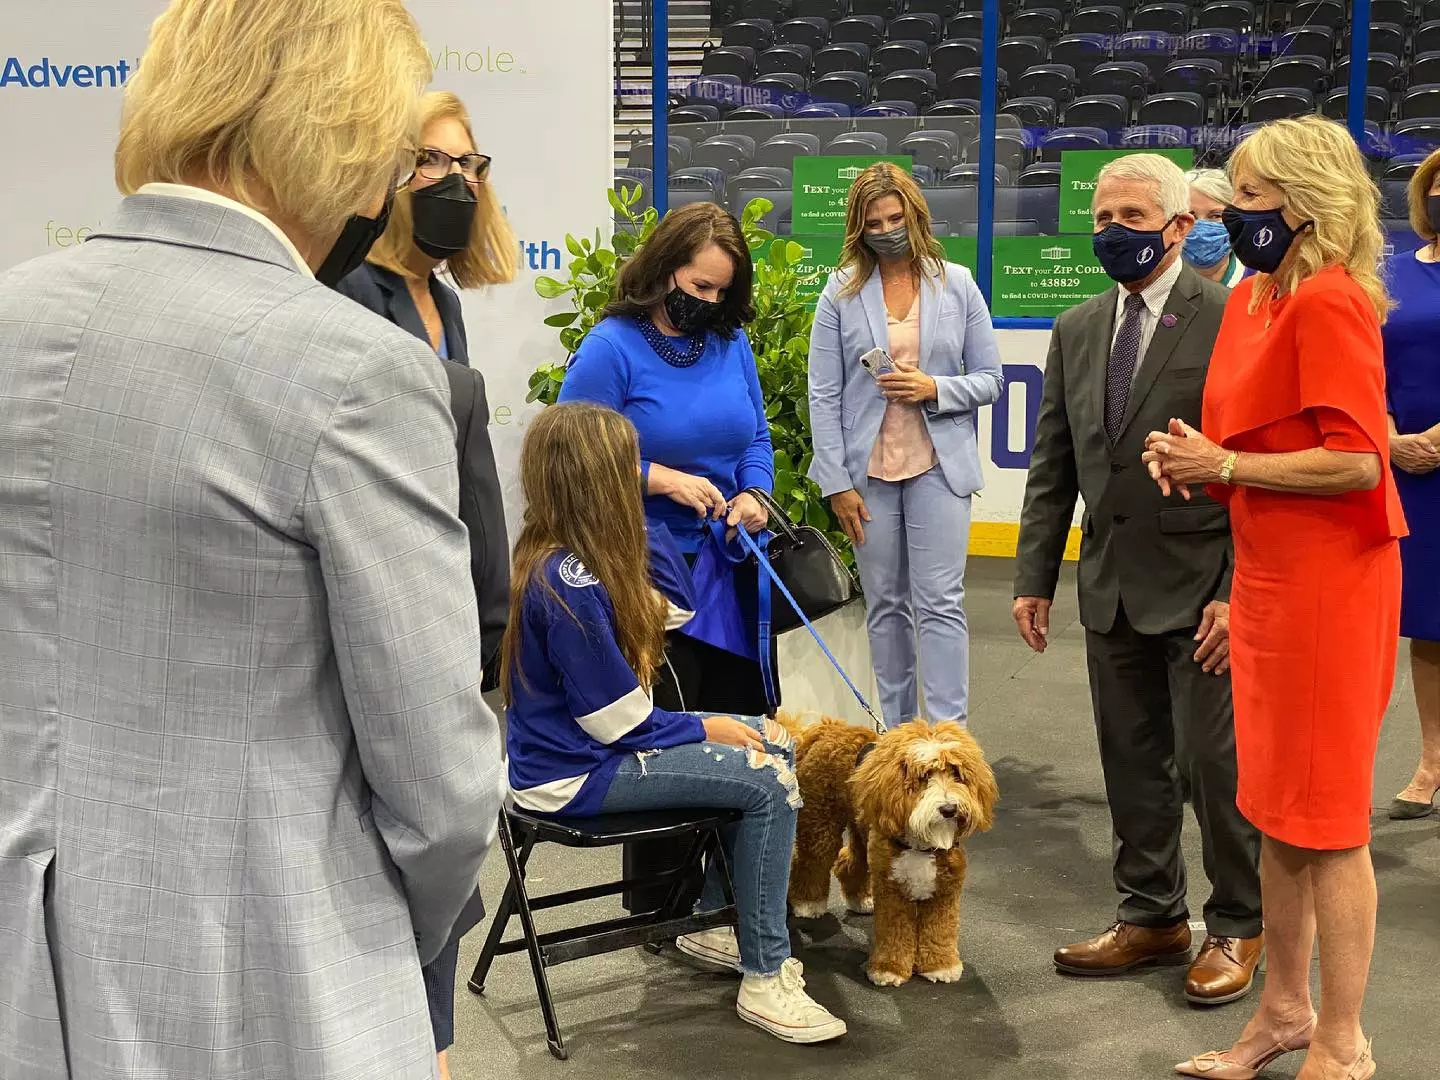 First lady Jill Biden and Dr. Anthony Fauci visited the Shots on Ice vaccination event hosted by AdventHealth and the Tampa Bay Lightning at the Amalie Arena in Tampa.